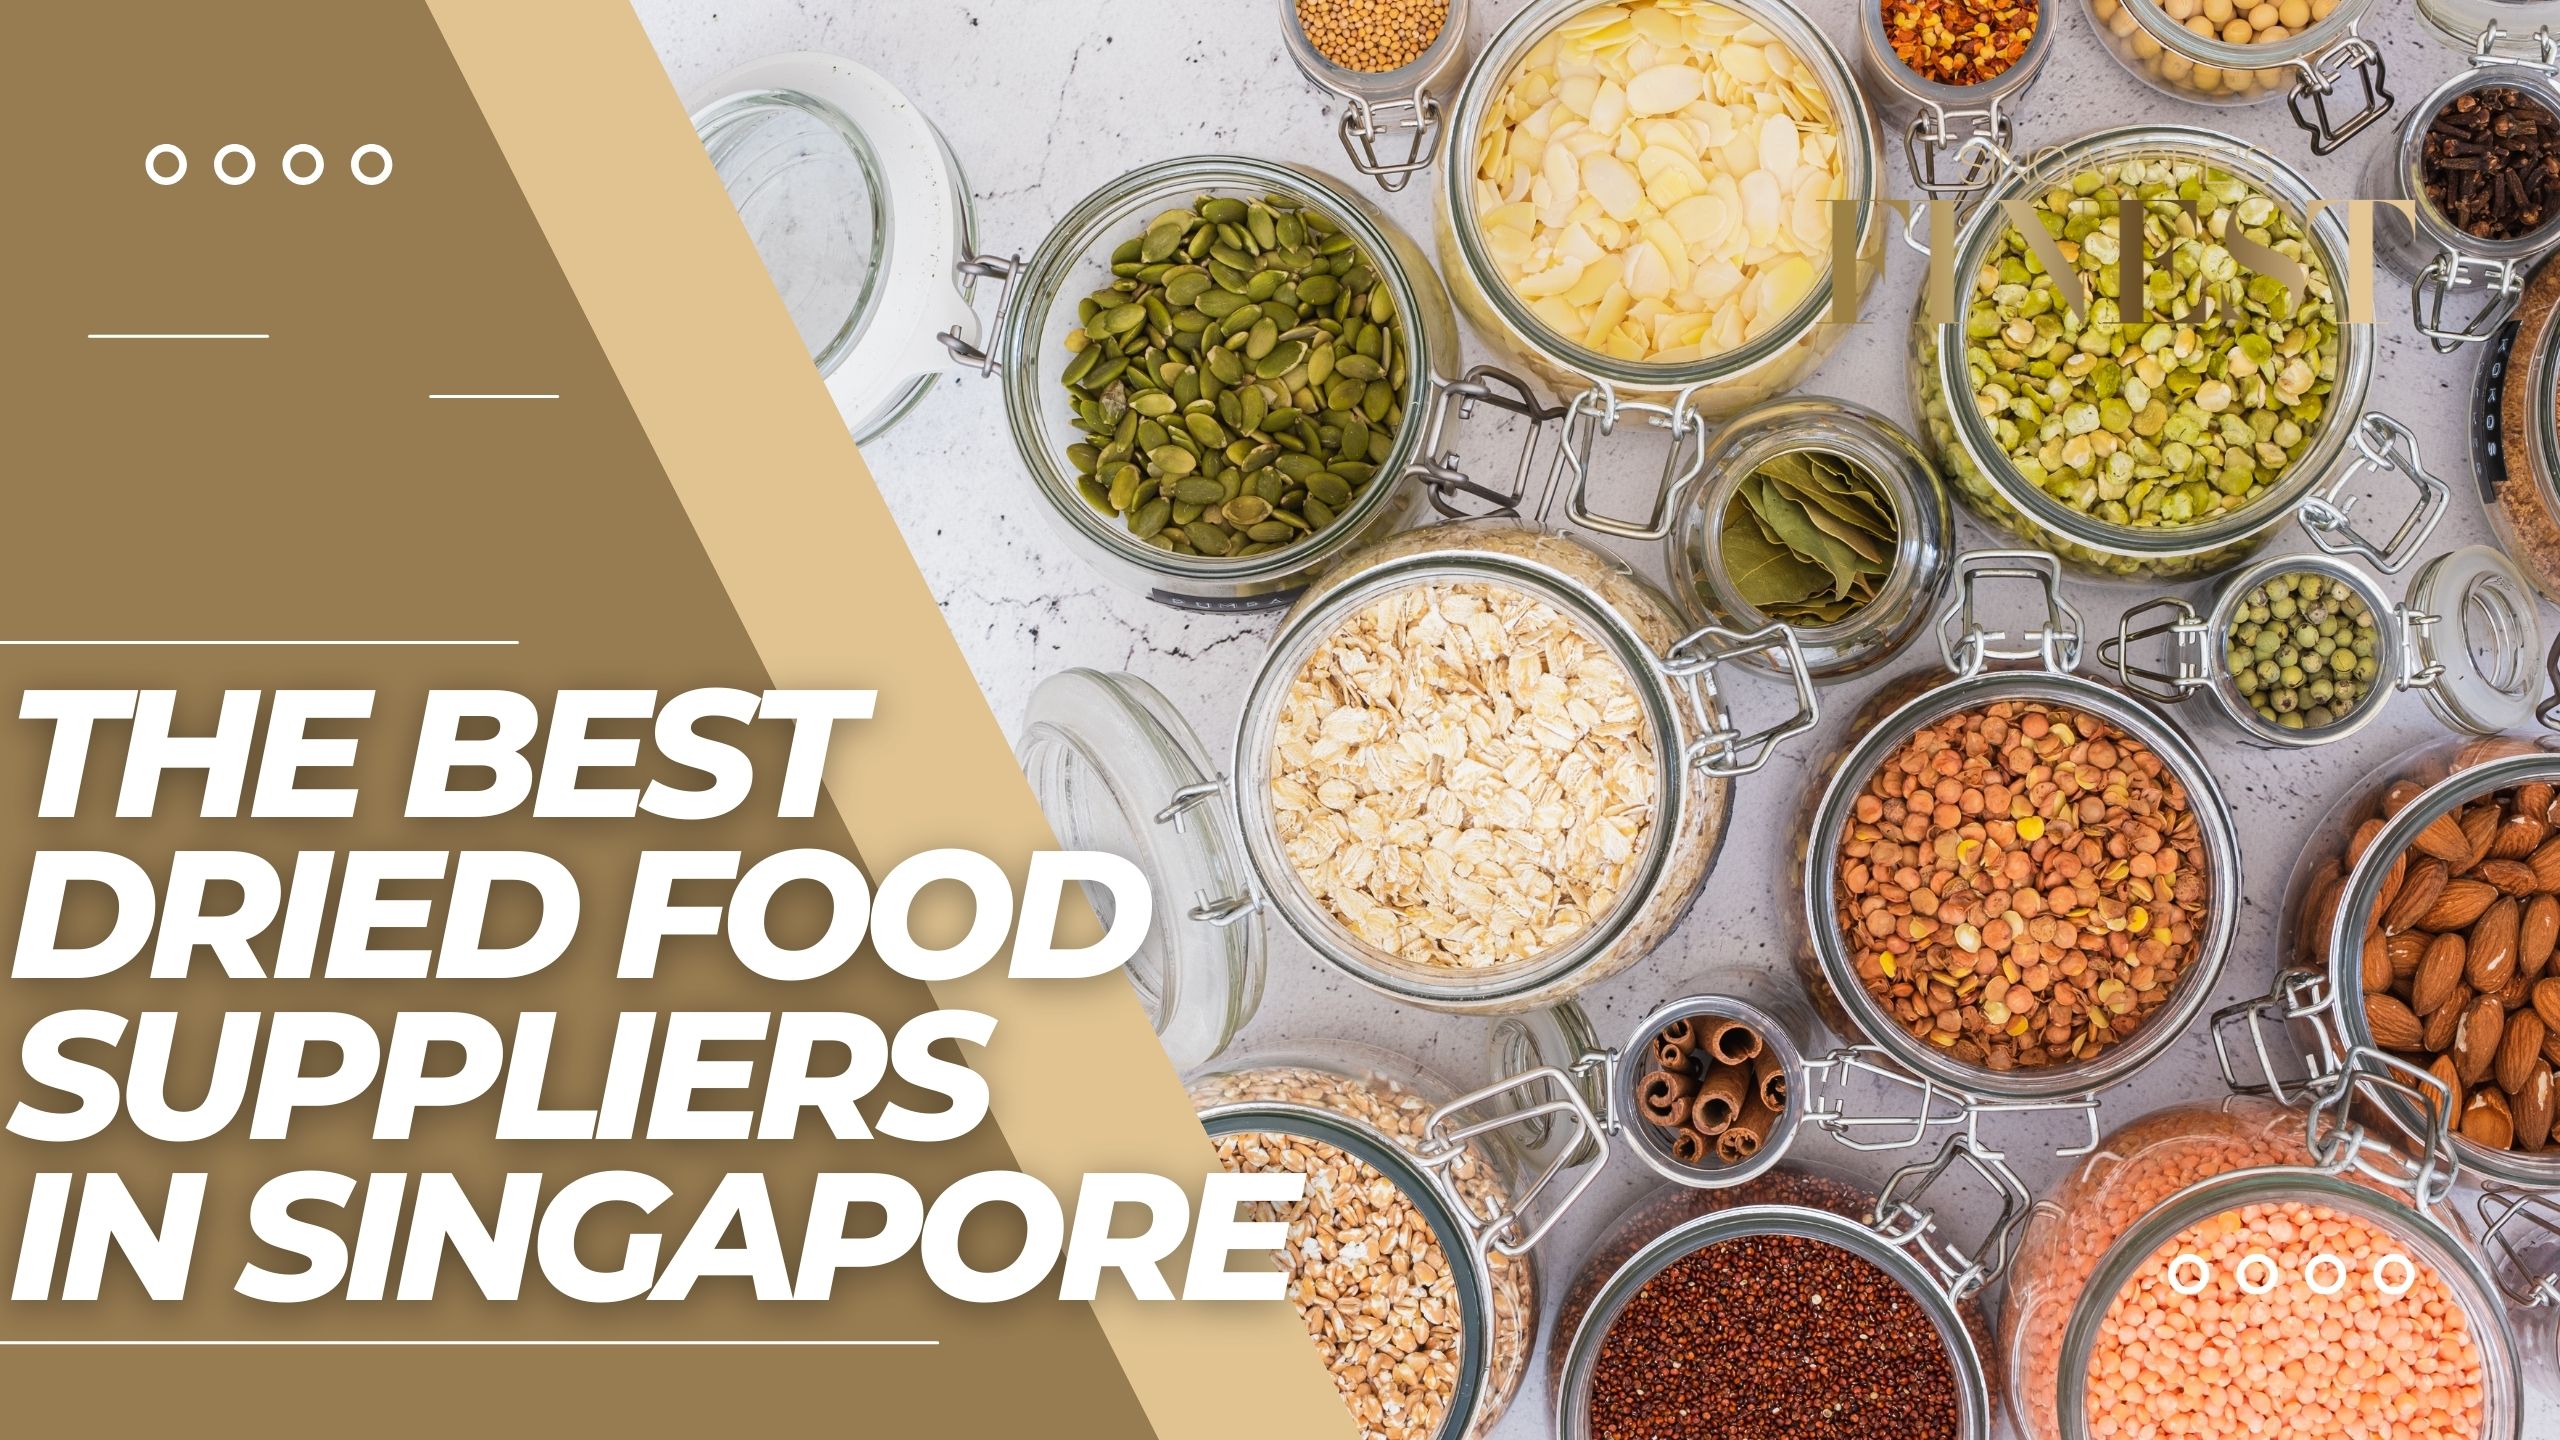 The Finest Dried Food Supplier in Singapore